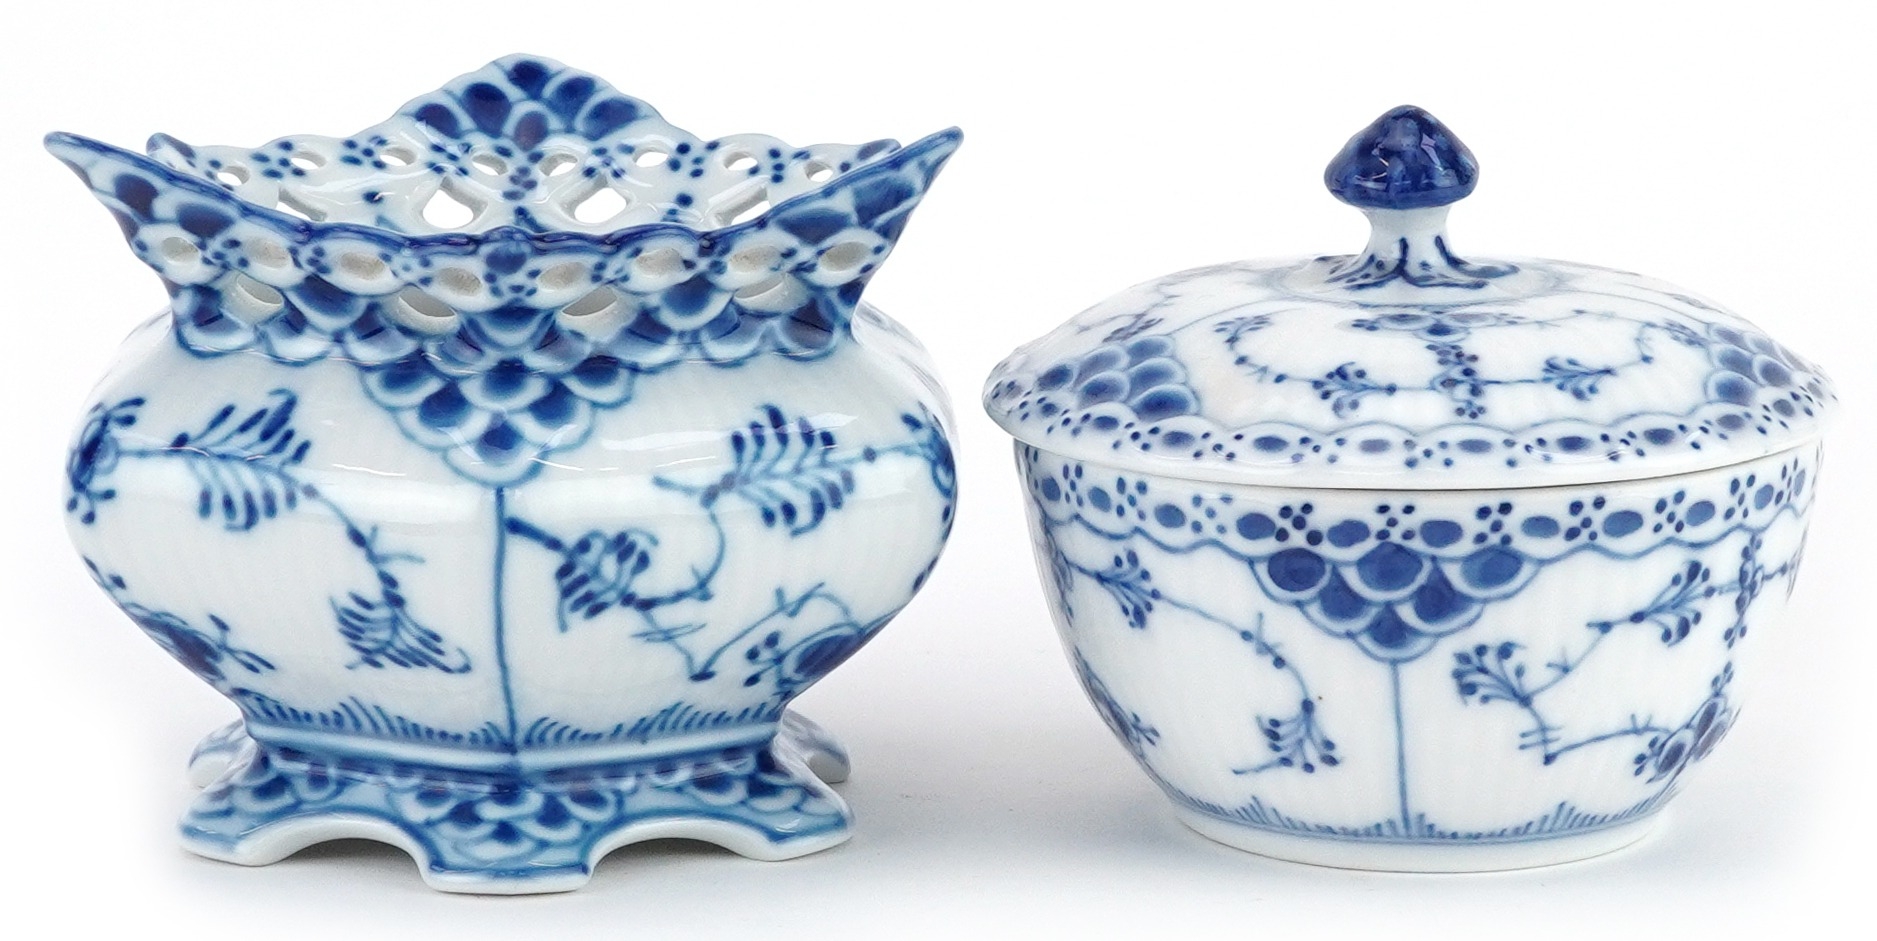 Royal Copenhagen, Danish blue and white Musselmalet porcelain including a pot and cover numbered 459 - Image 3 of 4